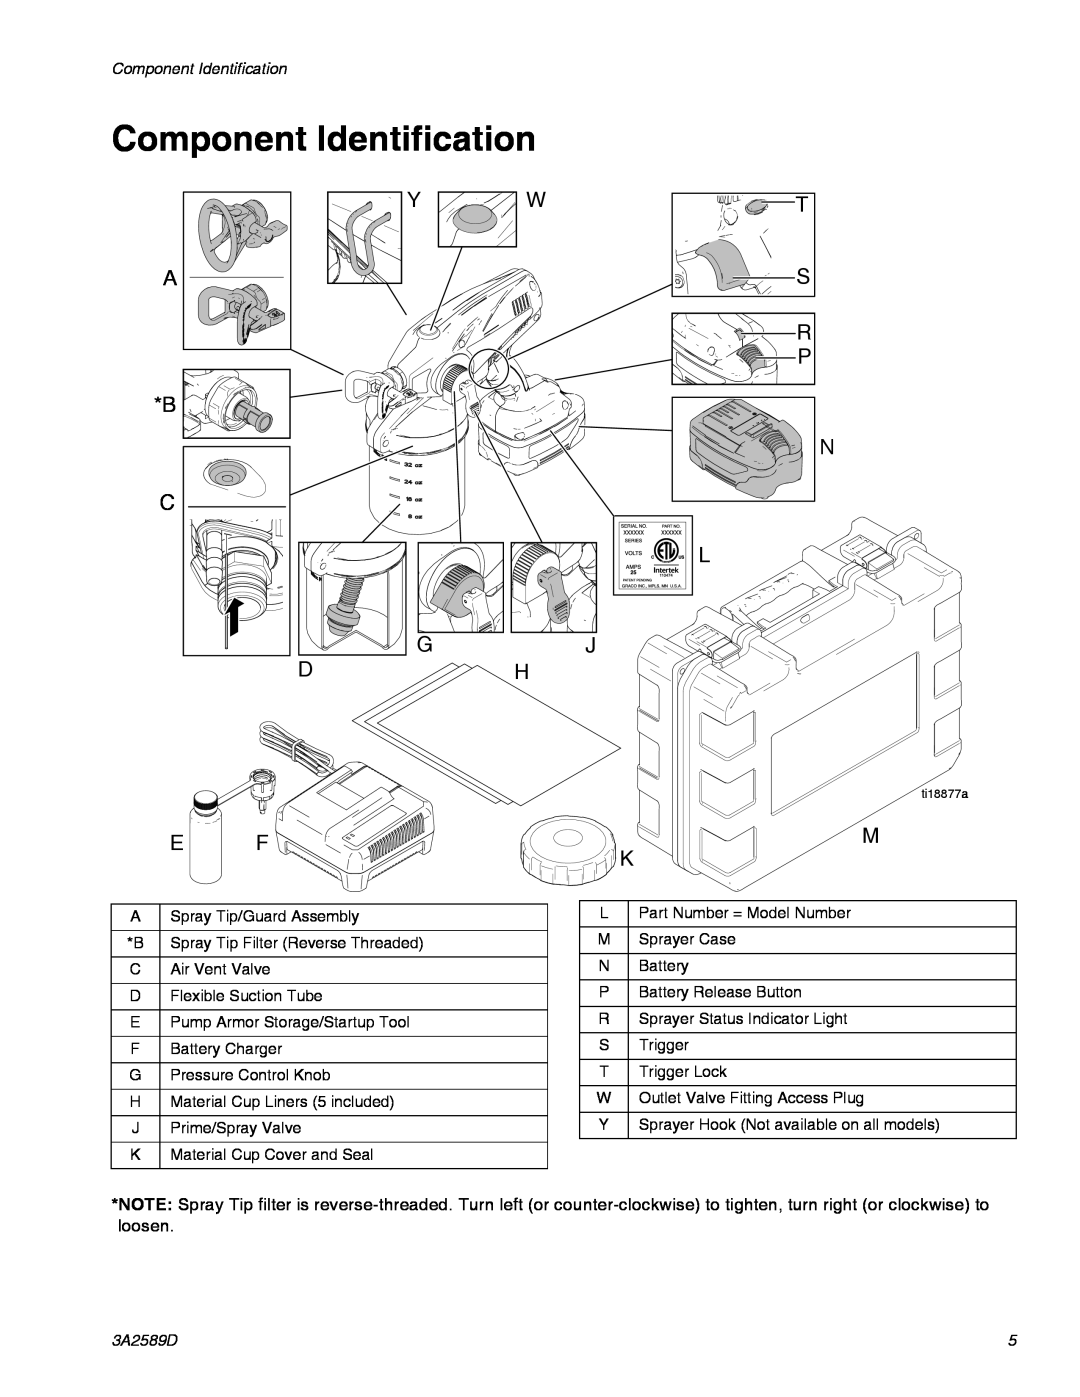 Graco 3A2589D important safety instructions Component Identification 